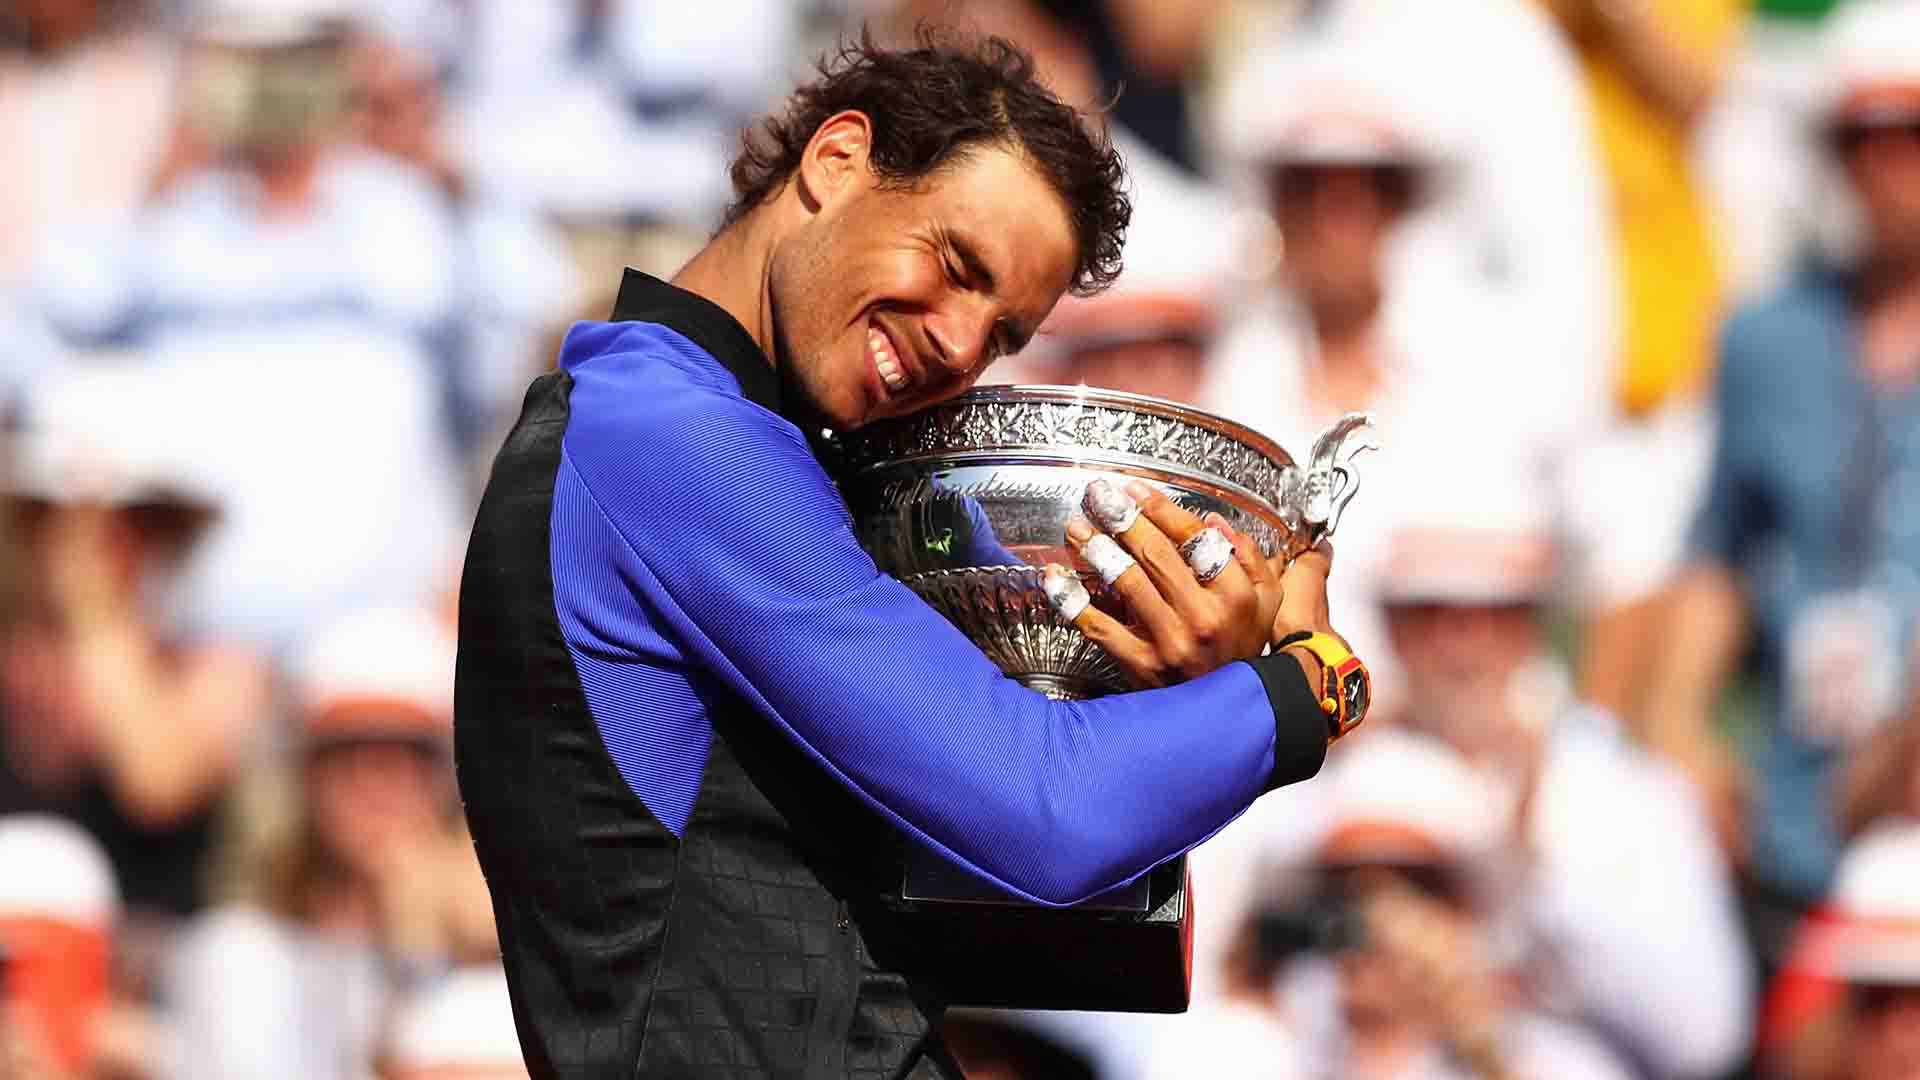 Rafael Nadal races past Stan Wawrinka 6-2, 6-3, 6-1 to collect his 10th Roland Garros crown and end a three-year Grand Slam title drought.